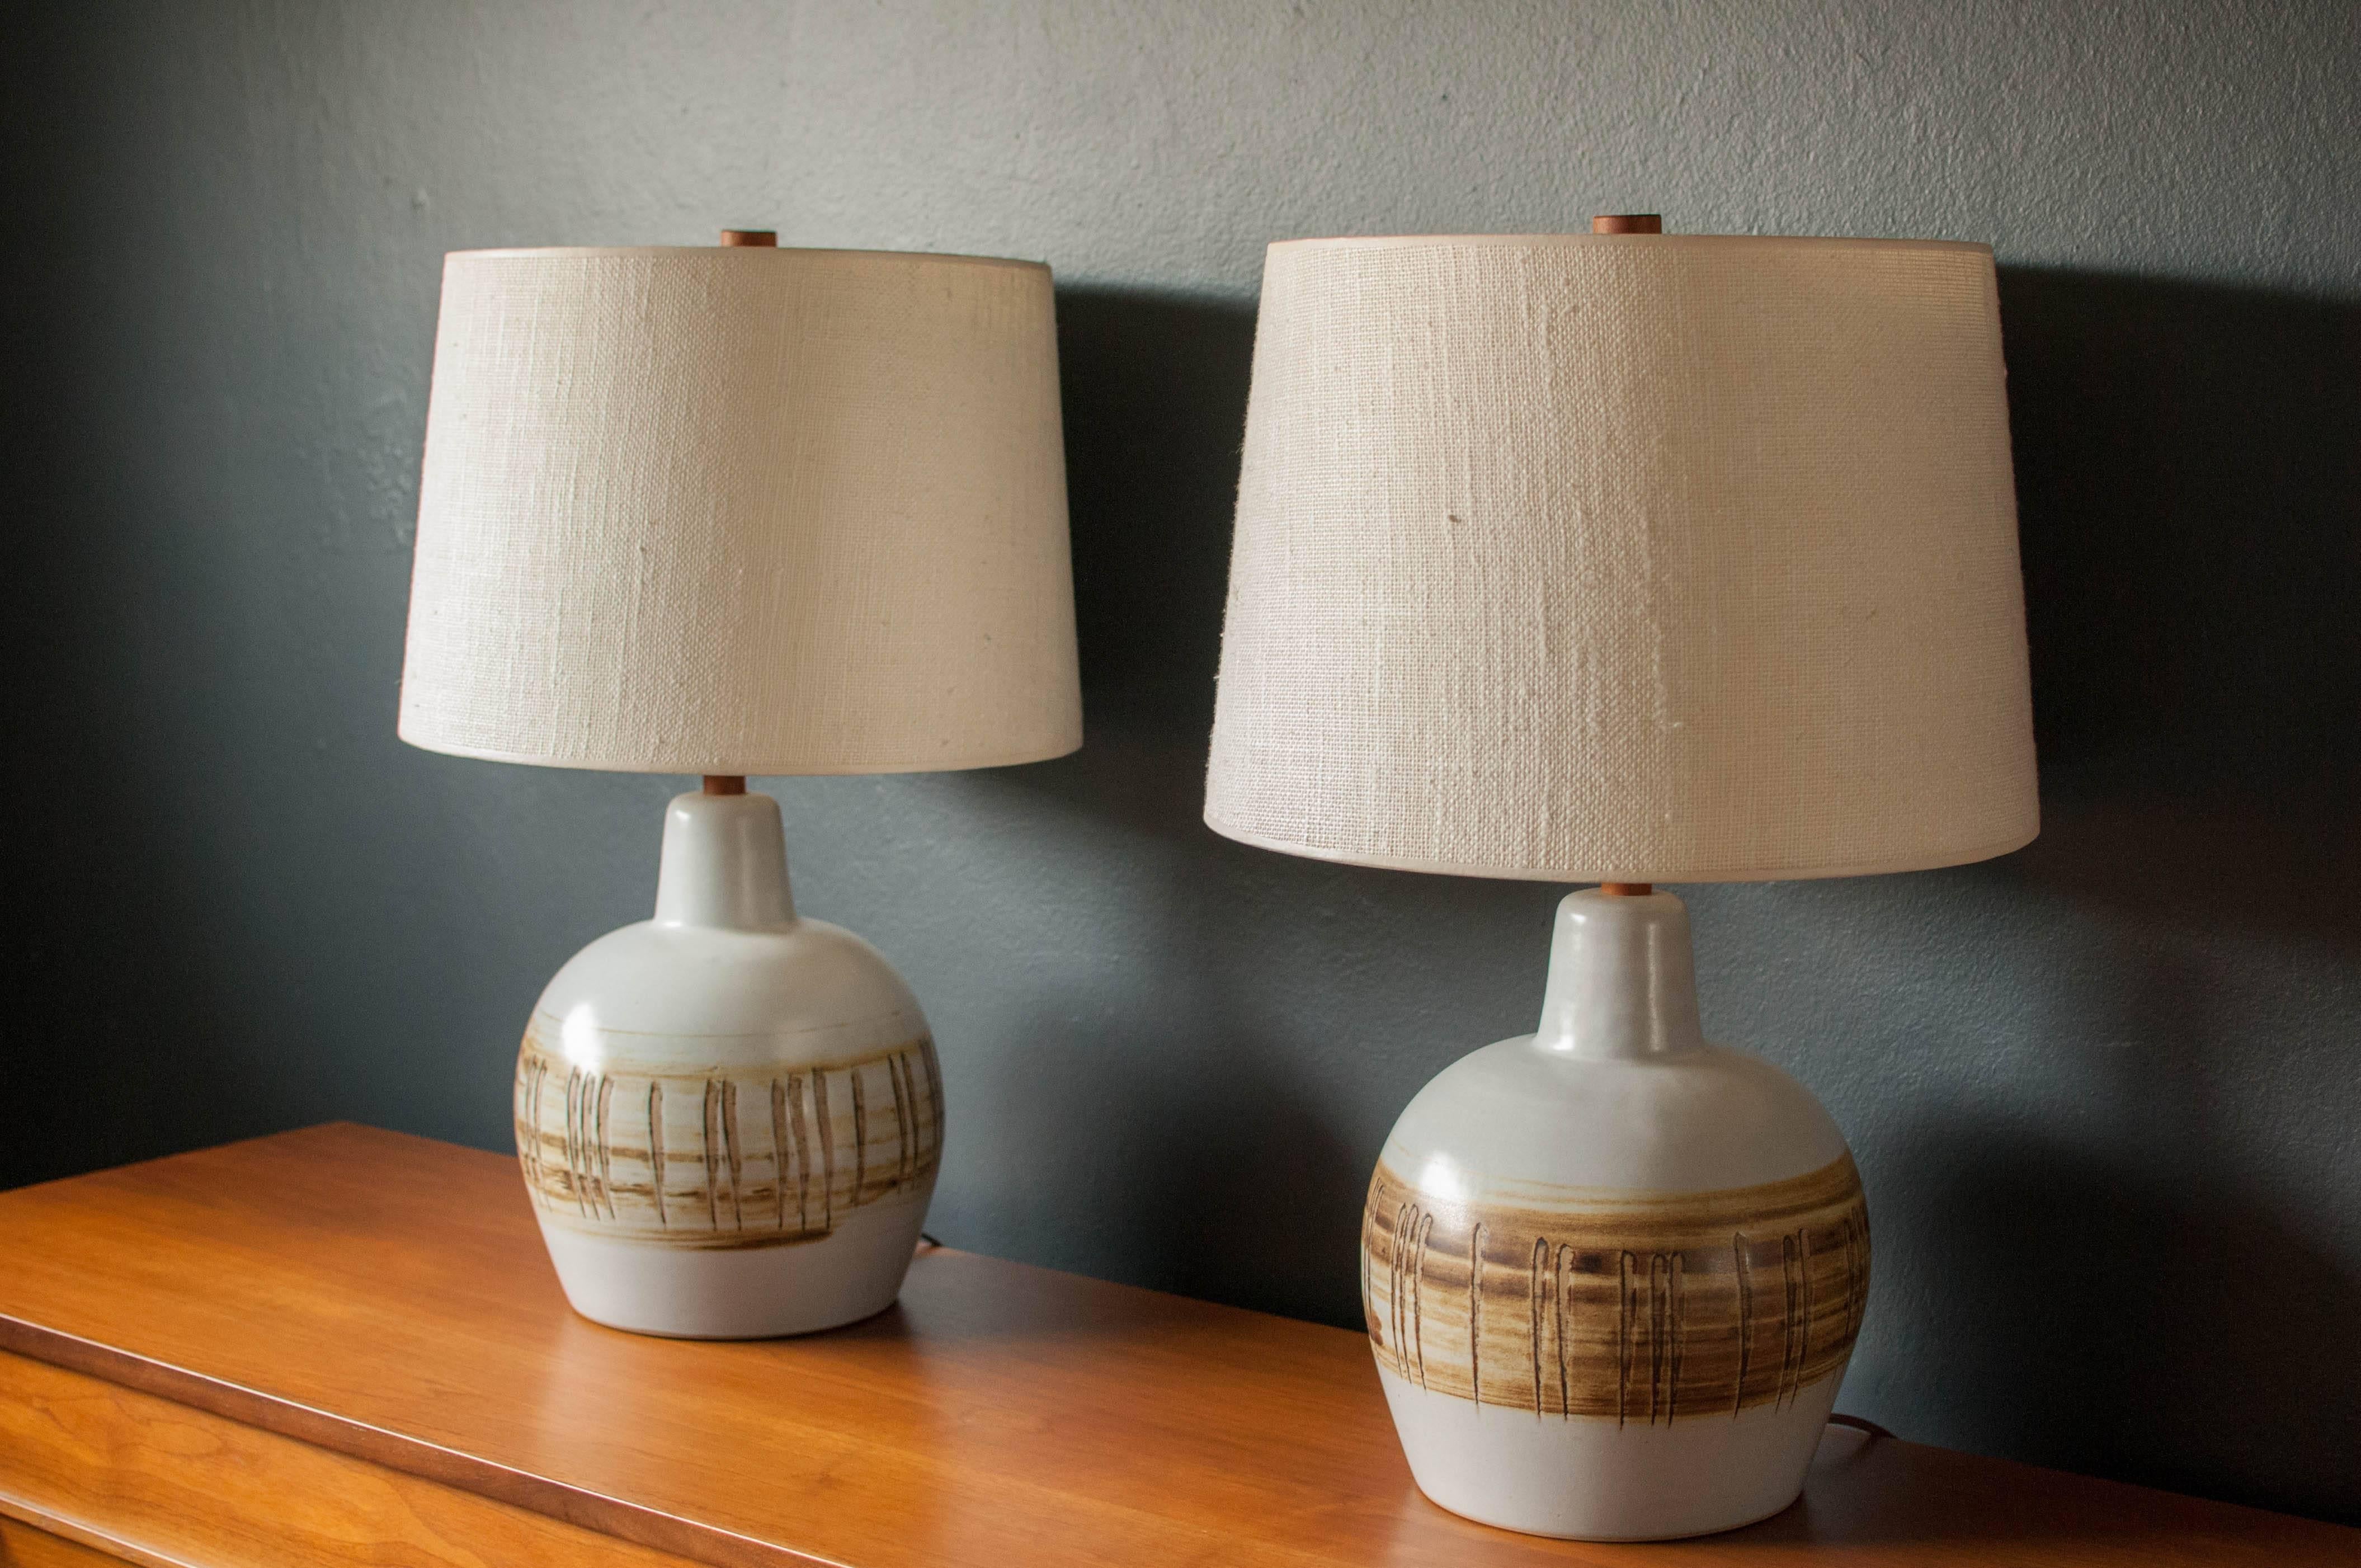 Mid-Century pair of pottery lamps designed by Jane and Gordon Martz for Marshall Studios. Stoneware white ceramic base displays a neutral tone finish complete with their signature walnut stem and finial. Price is for the pair. 

